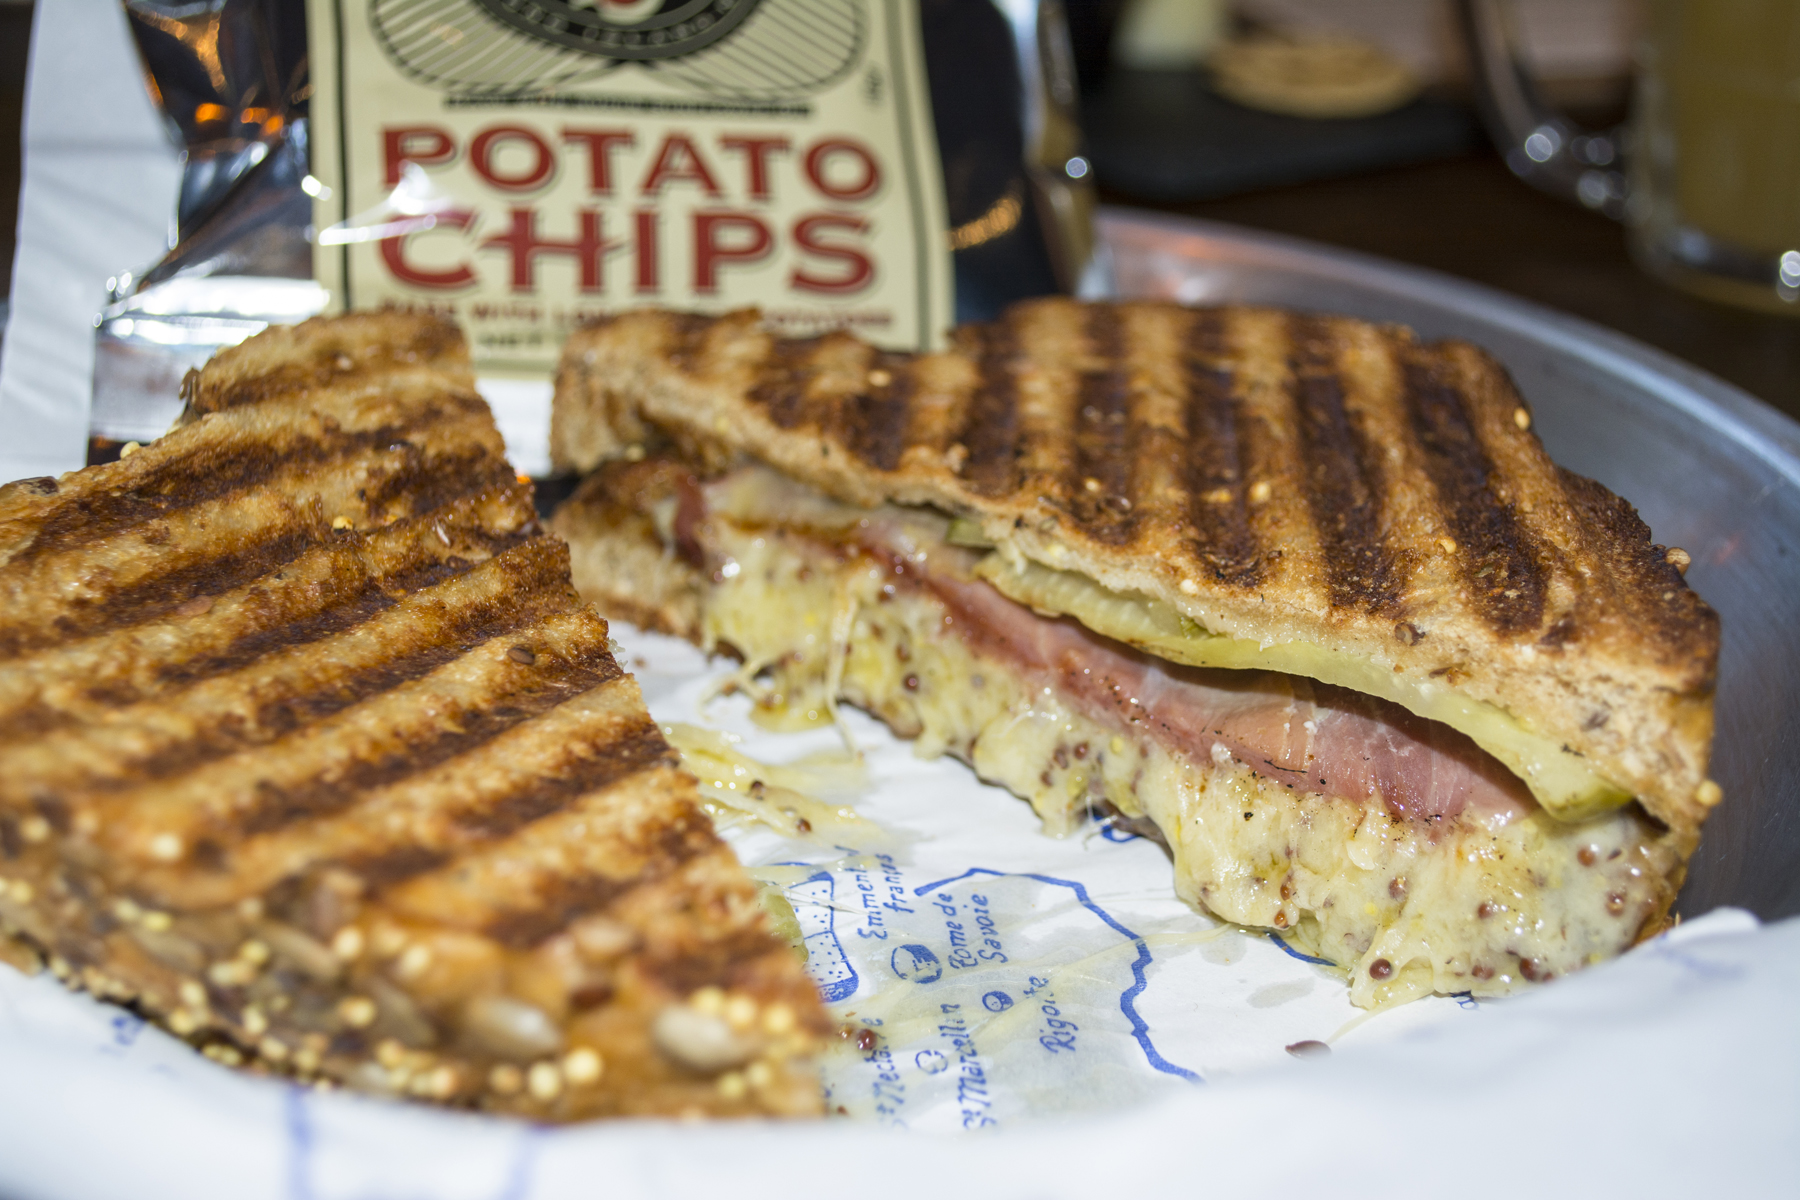   The Brew Cheese Cubano ($10) is served with sliced prosciutto, spicy pickles, and Red Dragon Welsh Mustard Cheddar.   Long Islander News photos/Barbara Fiore  